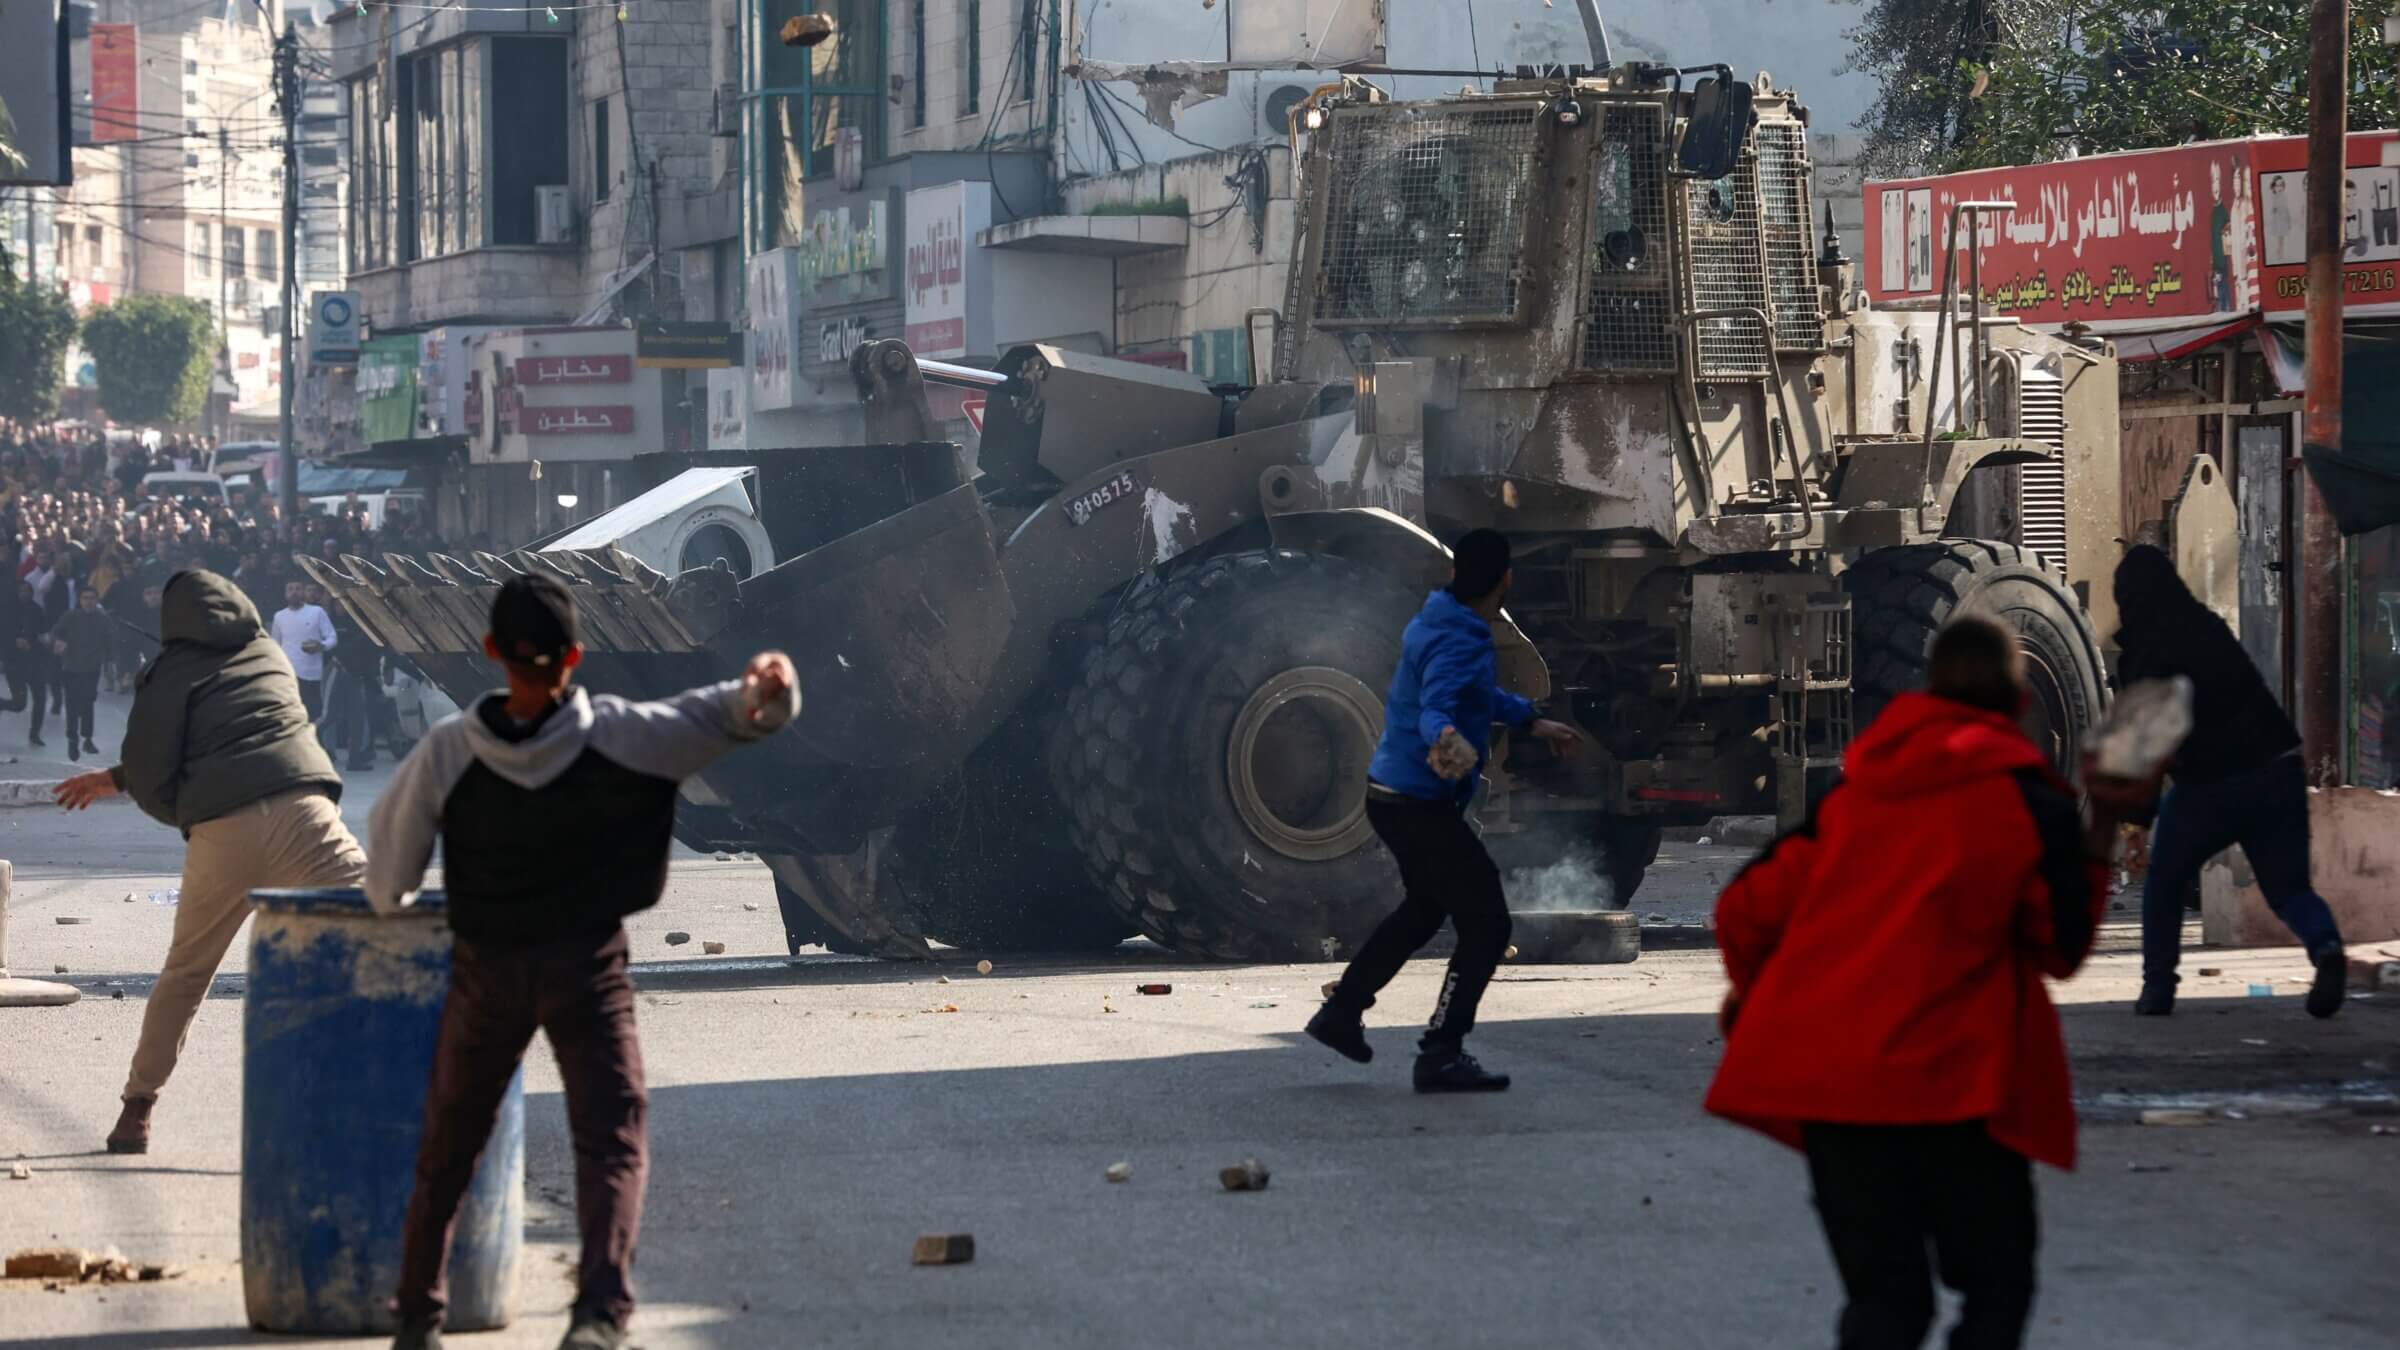 Palestinians hurl rocks at an Israeli army bulldozer, during confrontations in the occupied-West Bank city of Jenin.